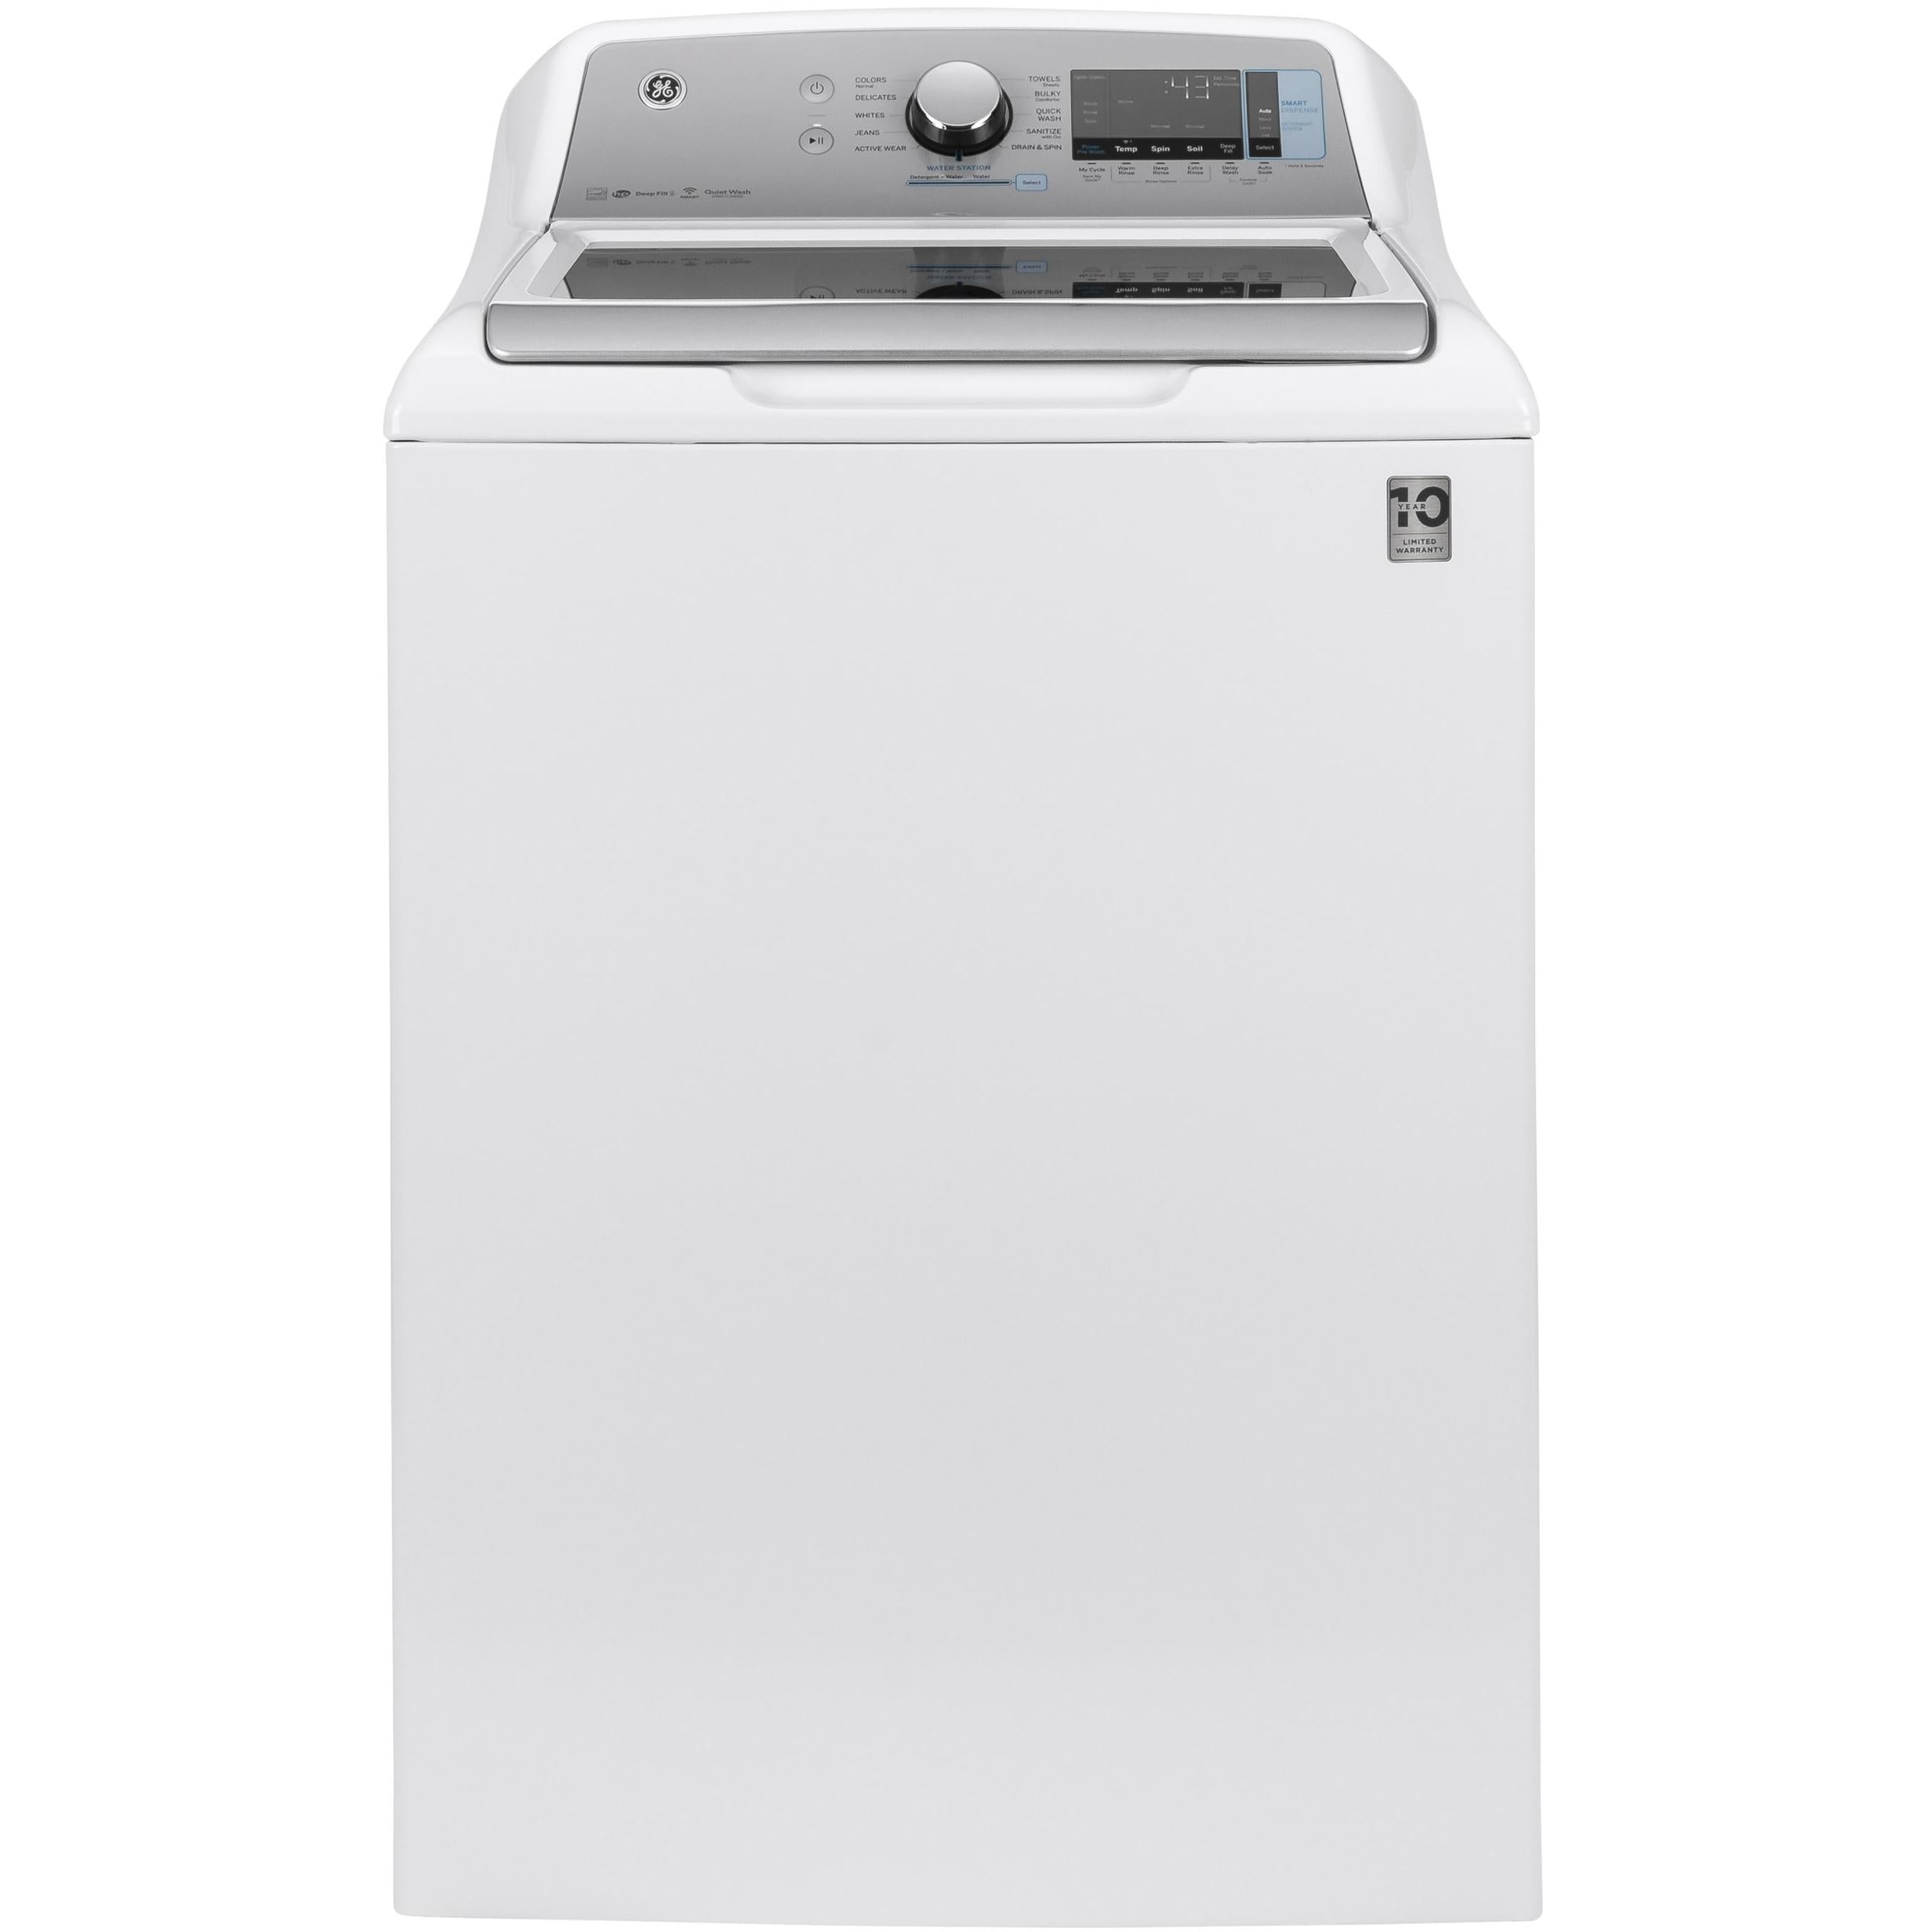 GE 5.0 cu. ft. Top Loading Washer GTW845CSNWS